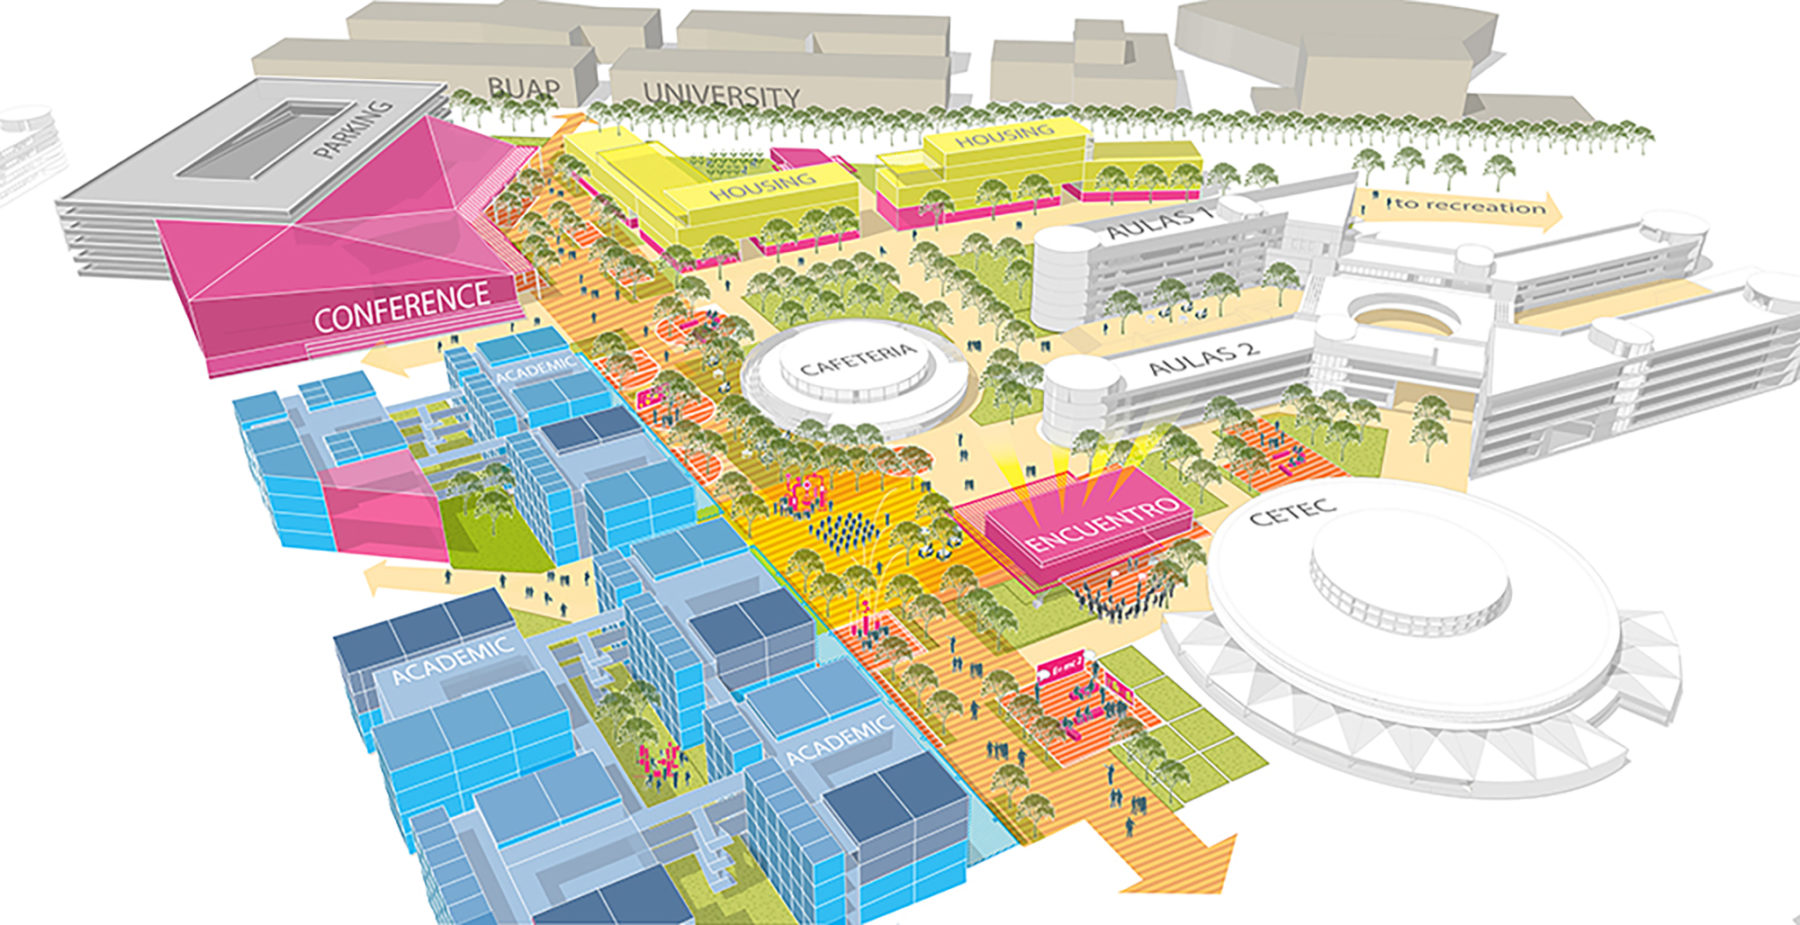 Colorful diagram of proposed building clusters in innovative campus layout